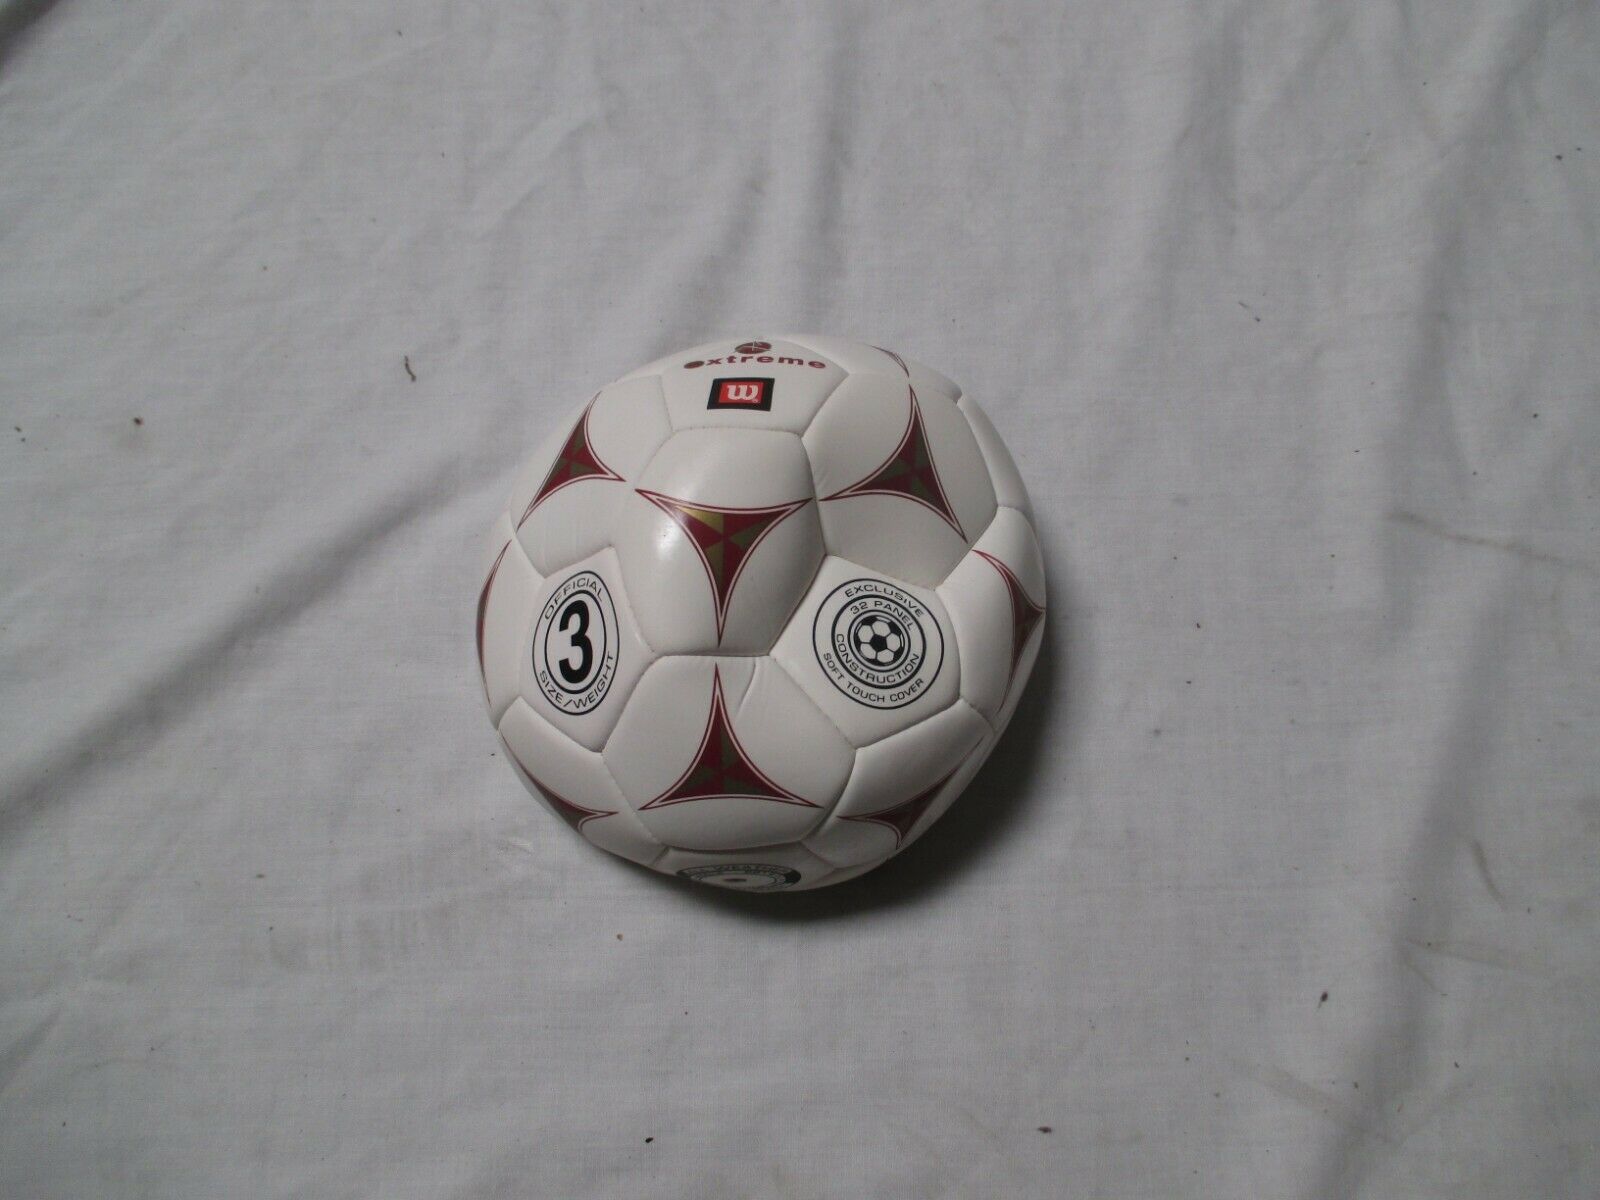 WILSON 8723 WHITE/MAROON/GOLD  EXTREME SOCCER BALL SIZE 3